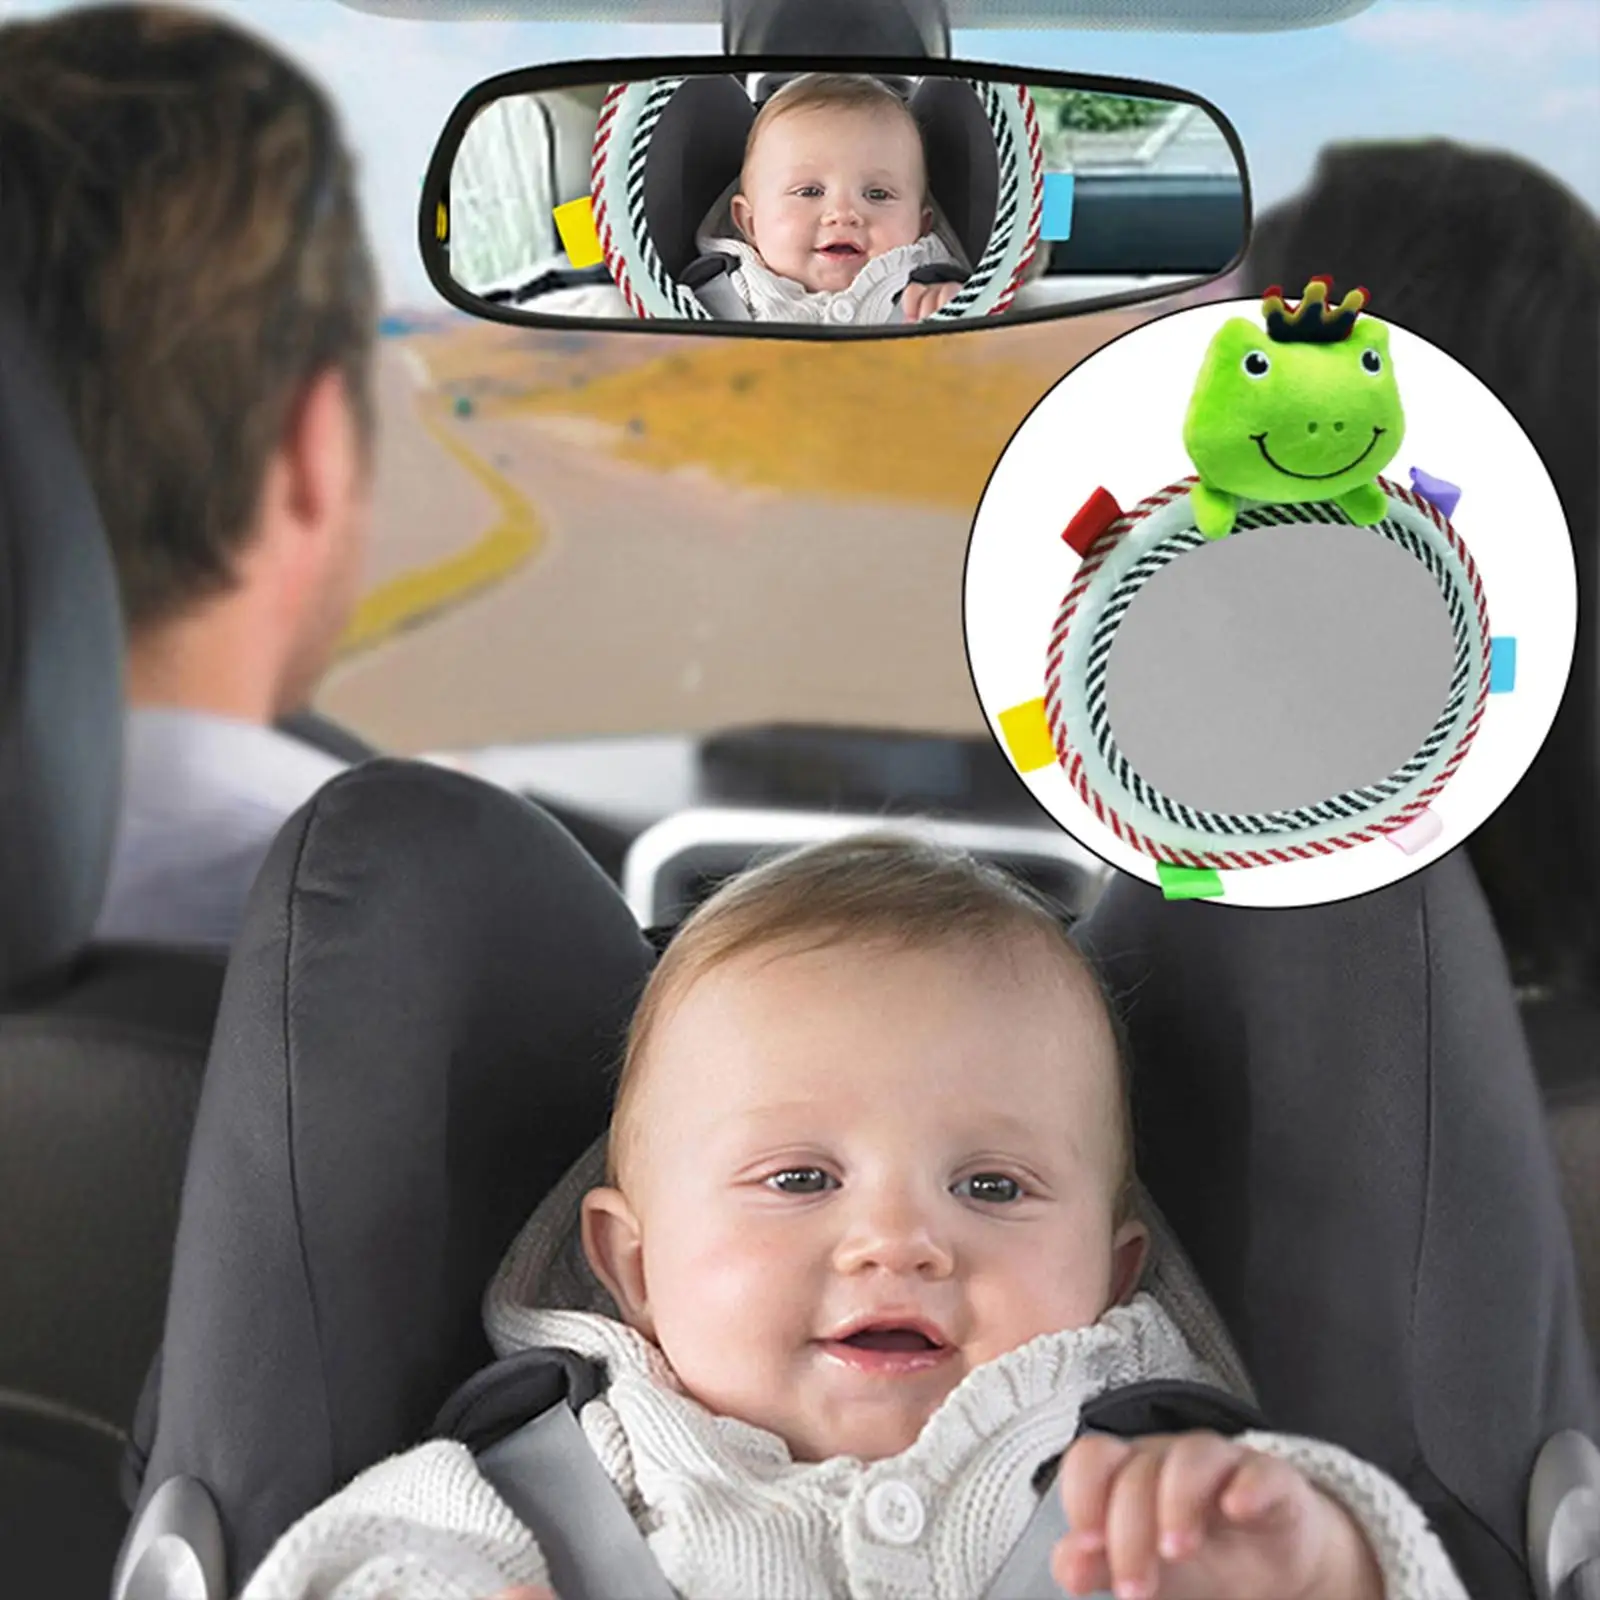 Car Back Seat Mirror Safety View Mirror Easy View Cute Car Baby Mirror for Toddler